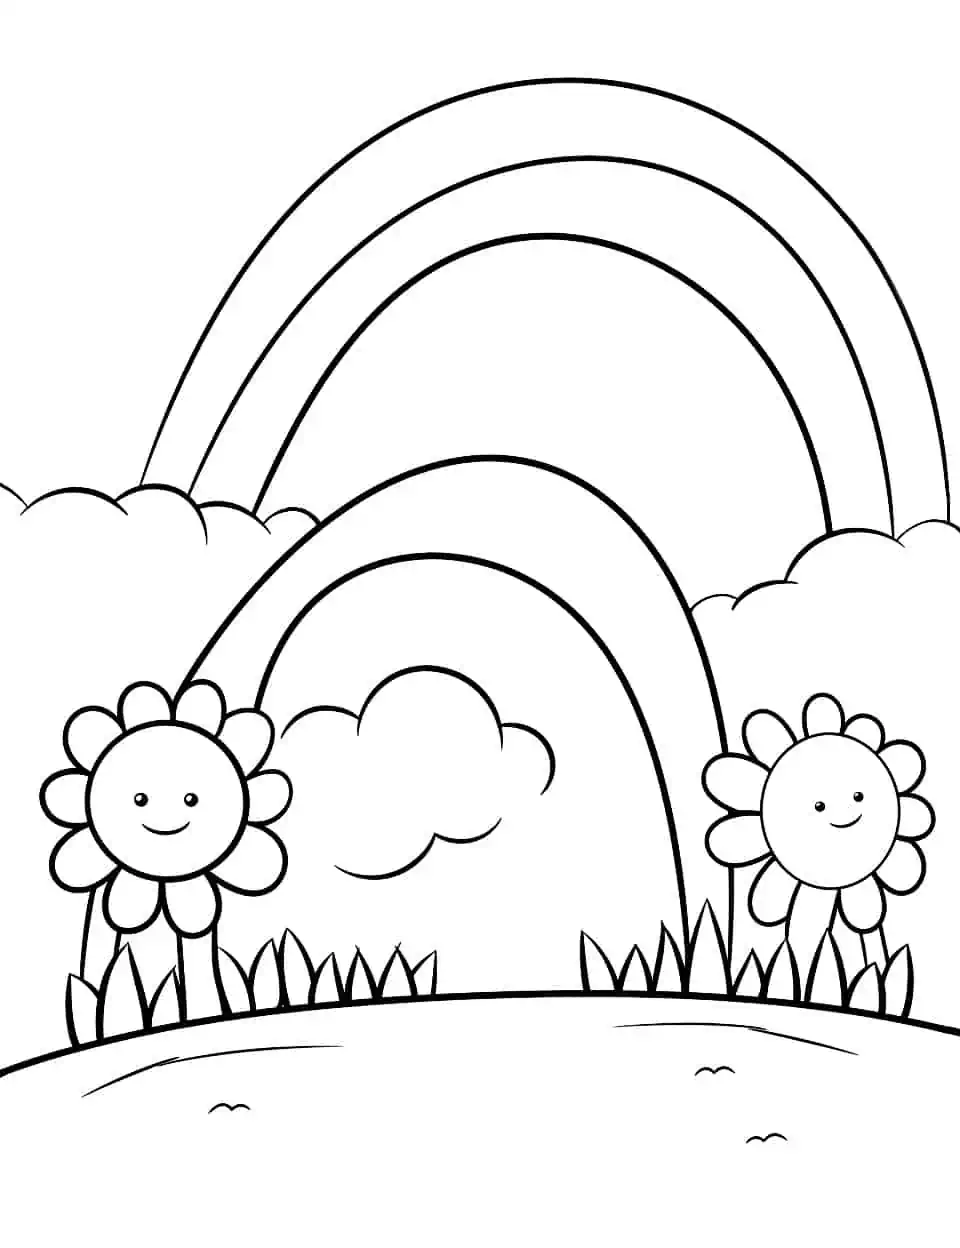 Simple Springtime Rainbow Spring Coloring Page - A simple coloring sheet for kids with a large, bright rainbow arching over a spring meadow.